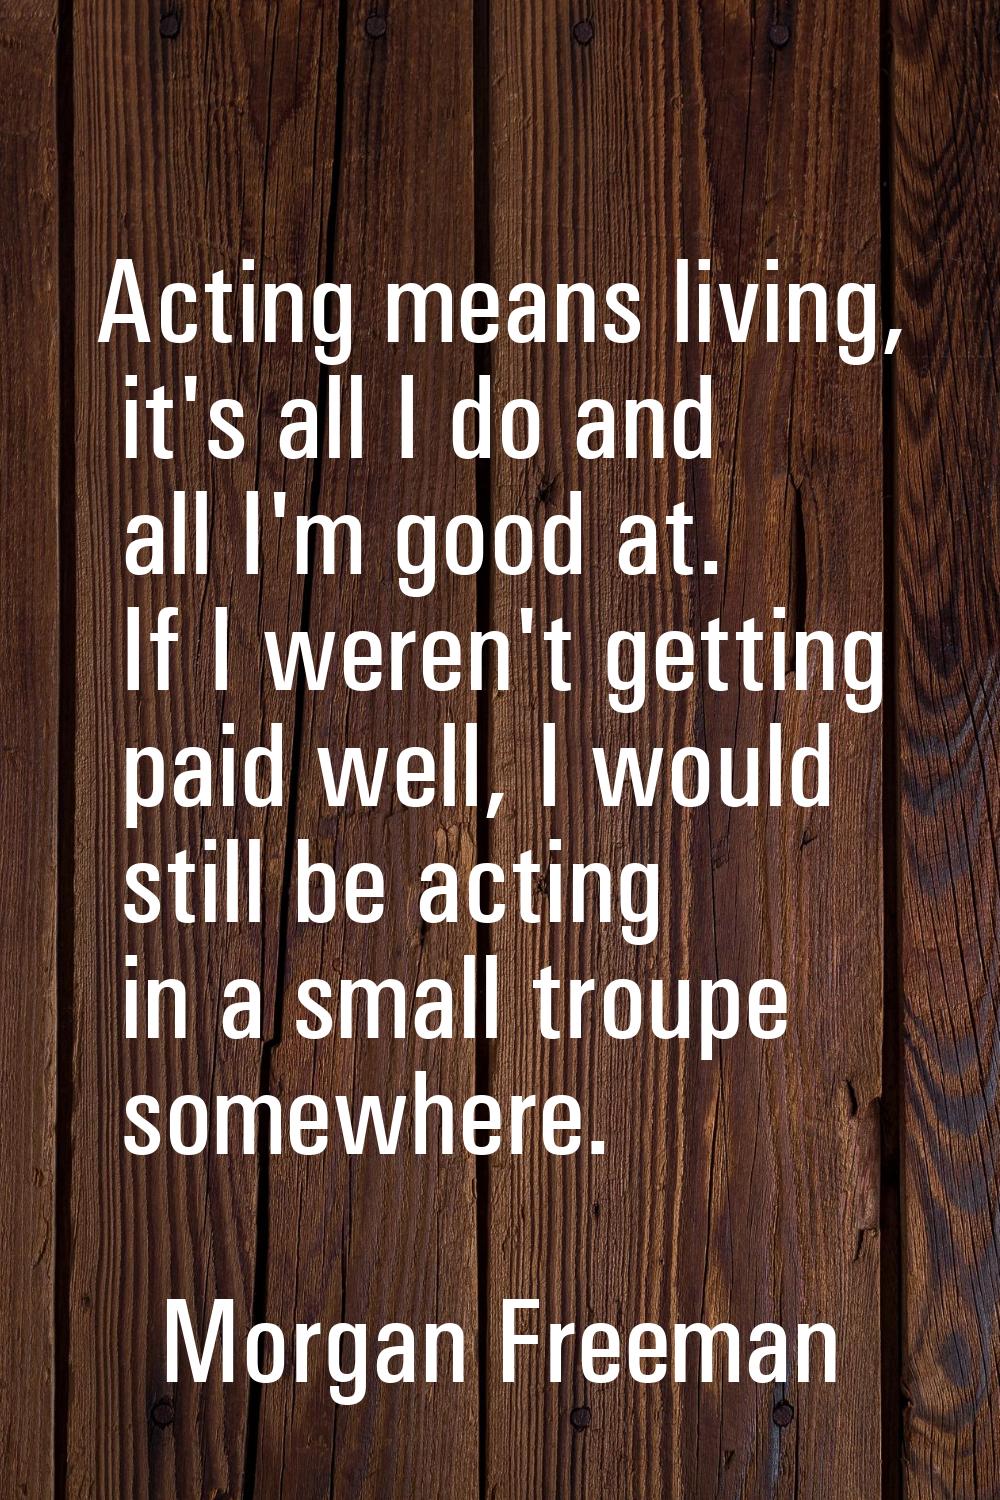 Acting means living, it's all I do and all I'm good at. If I weren't getting paid well, I would sti